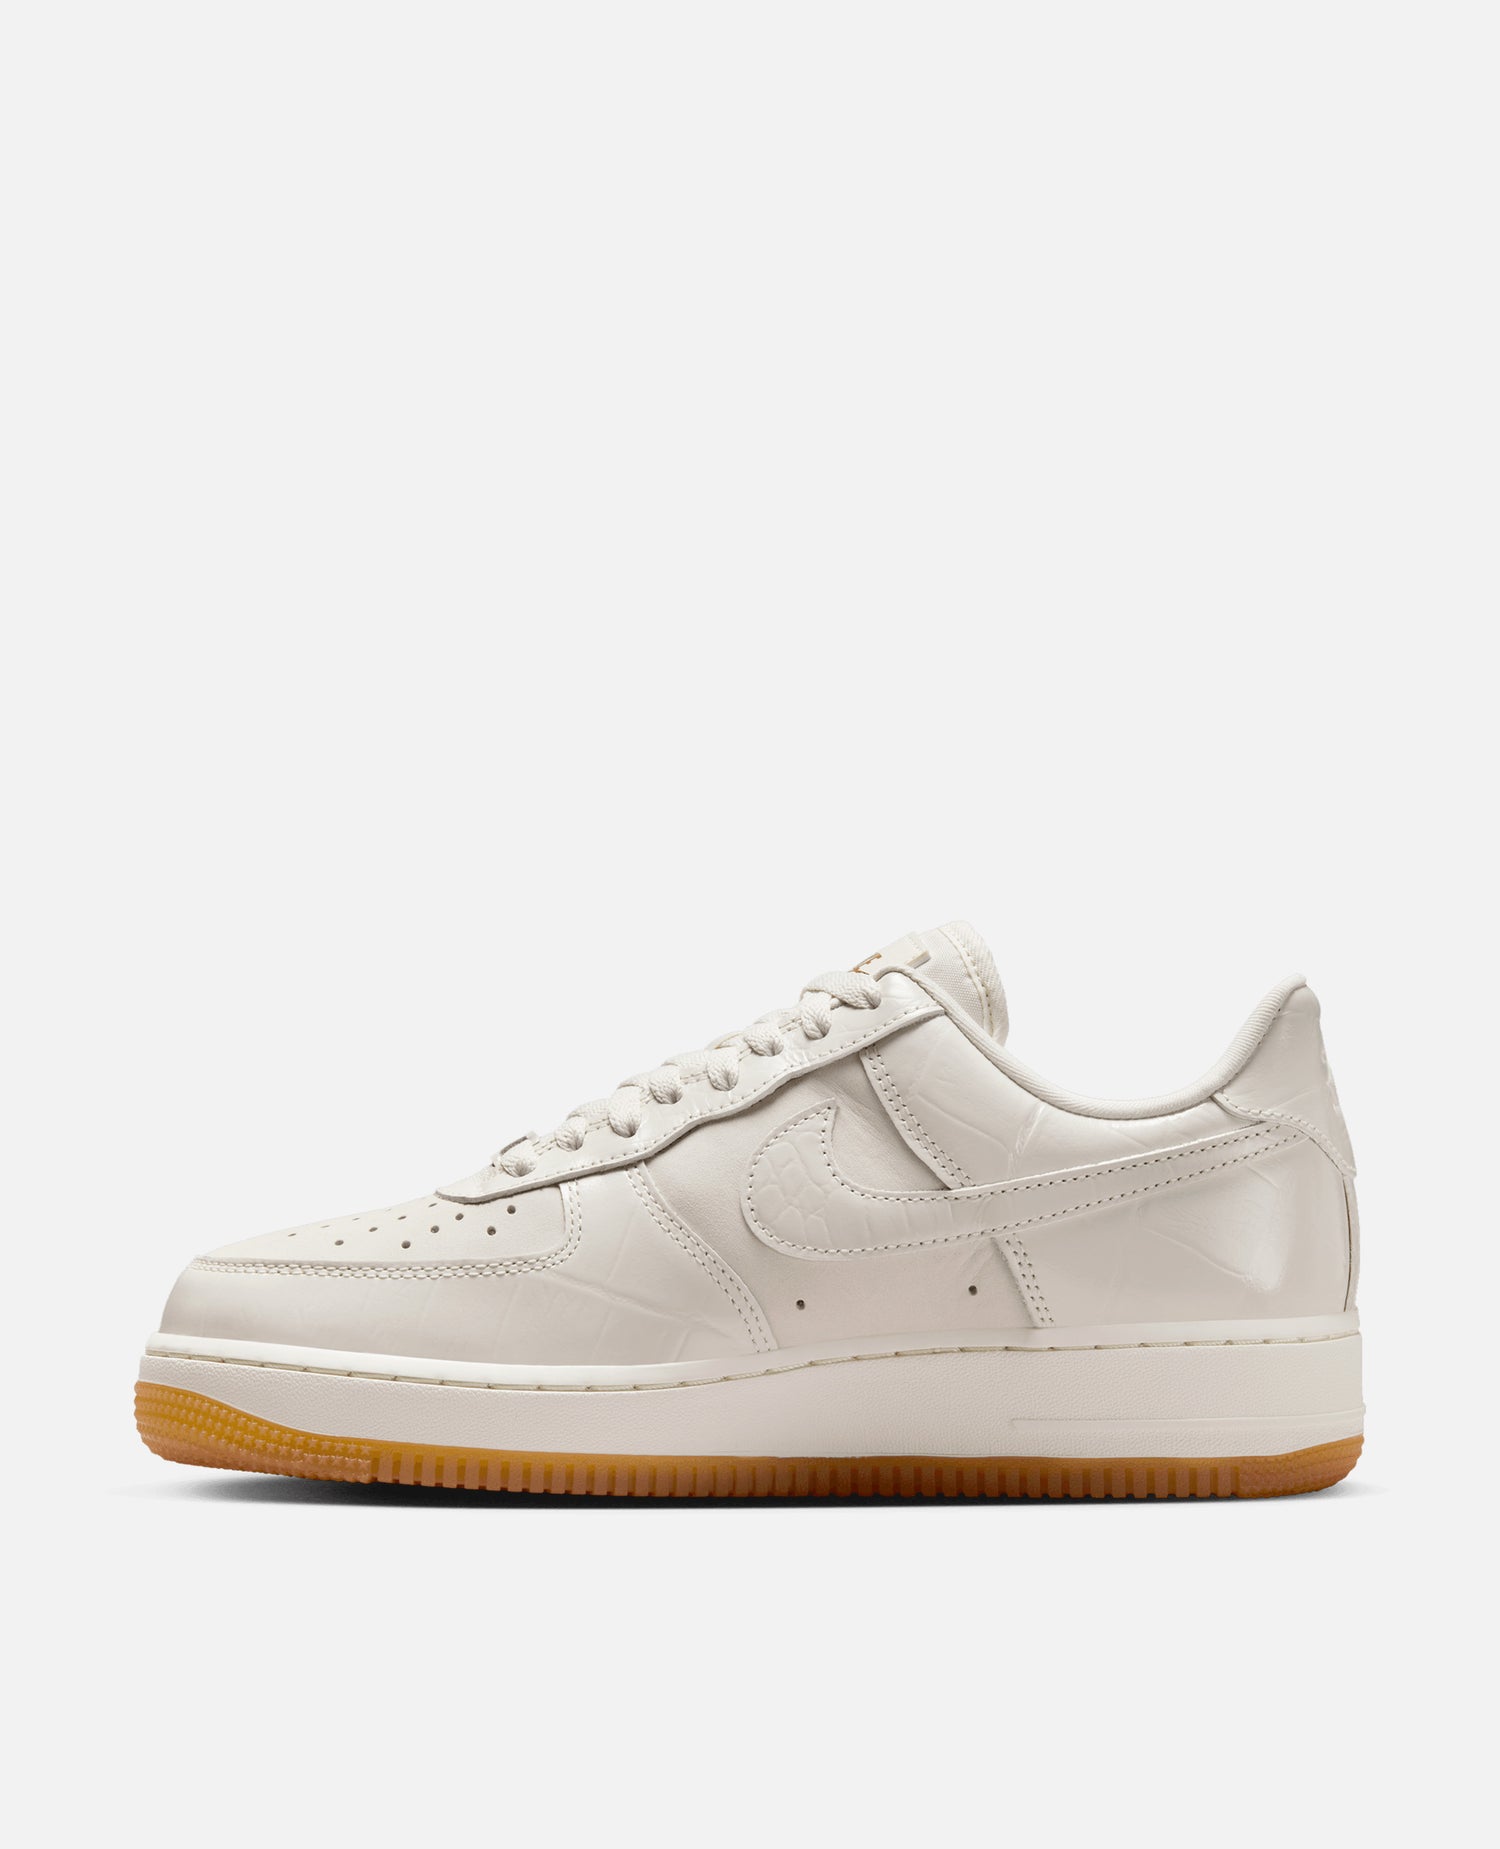 Nike Wmns Air Force 1 